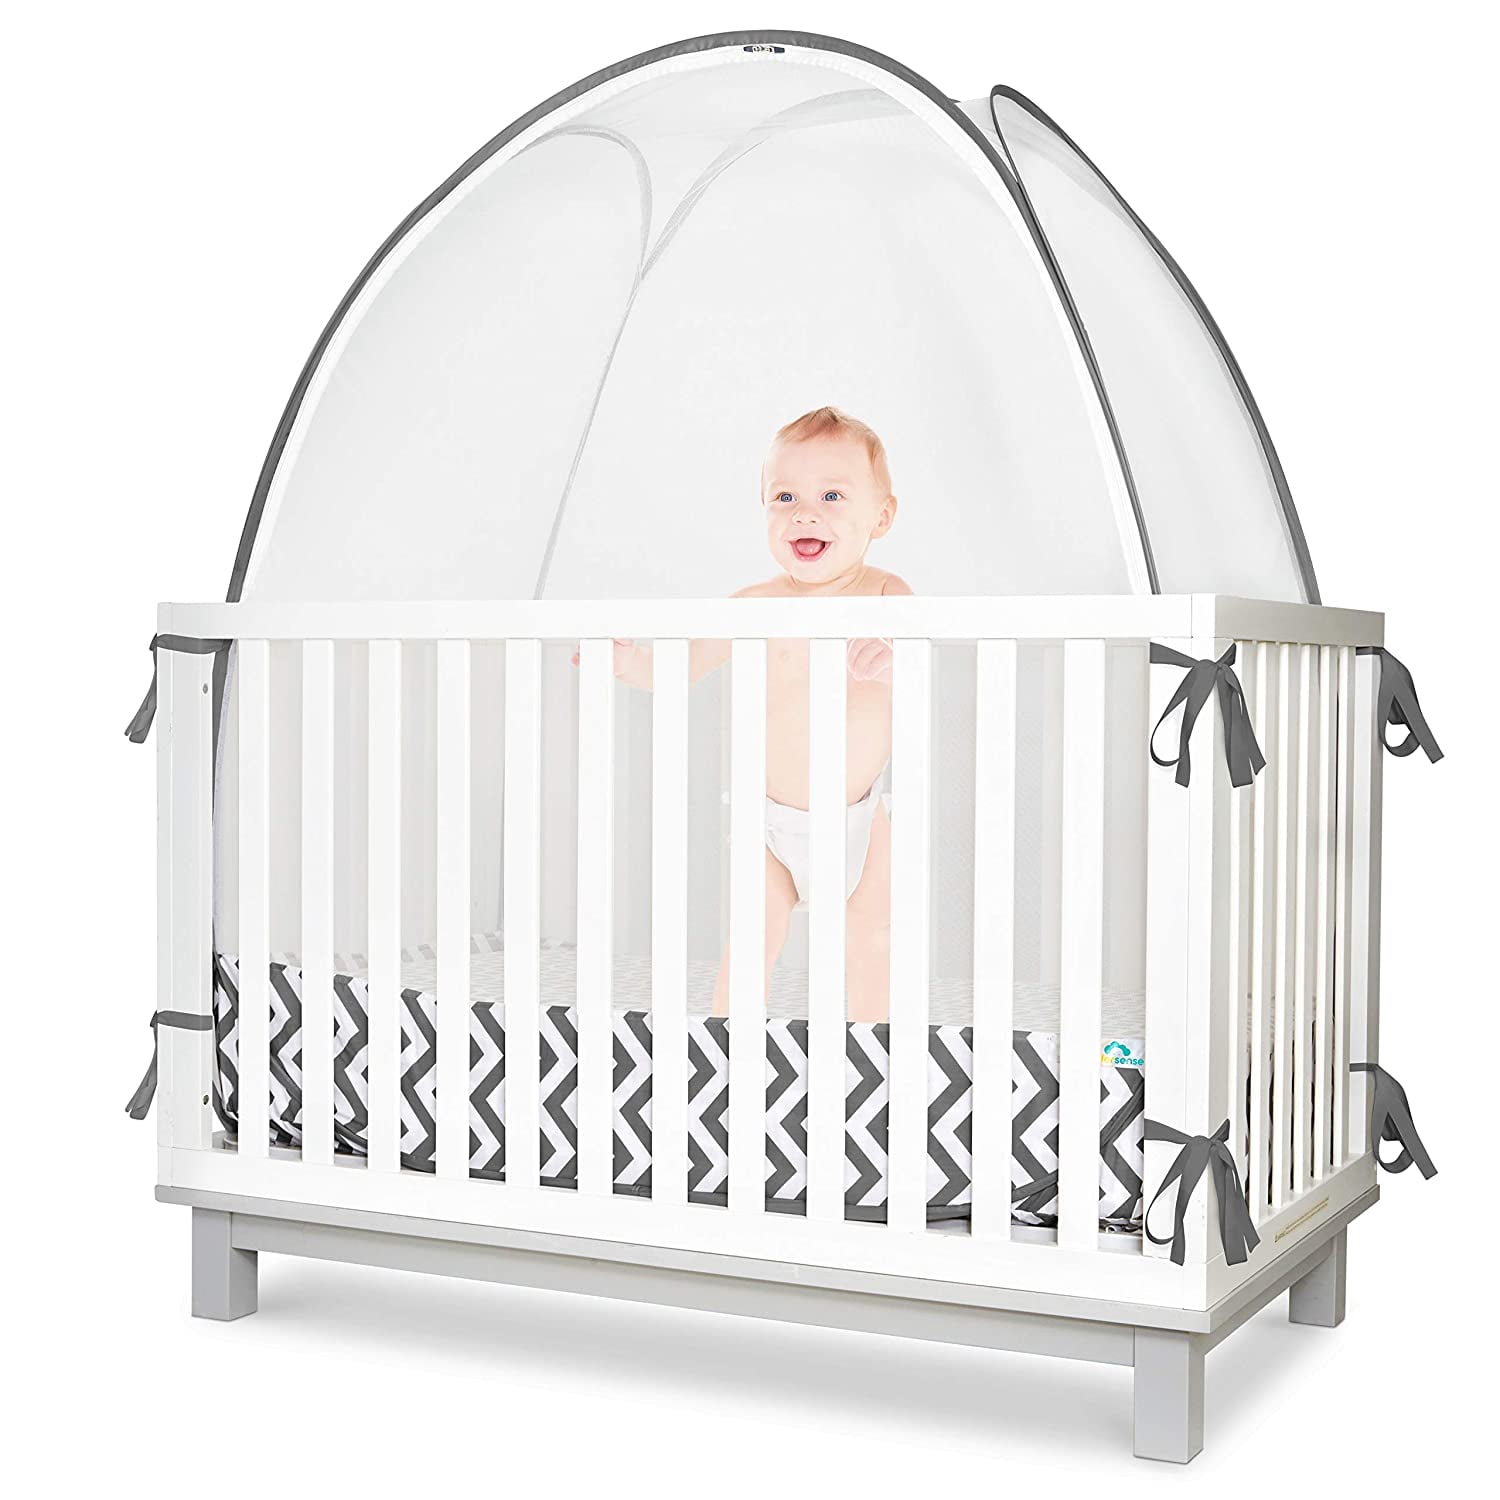 Baby Safety Crib Tent Premium Toddler Crib Topper to Keep Baby from Climbing Out See Through